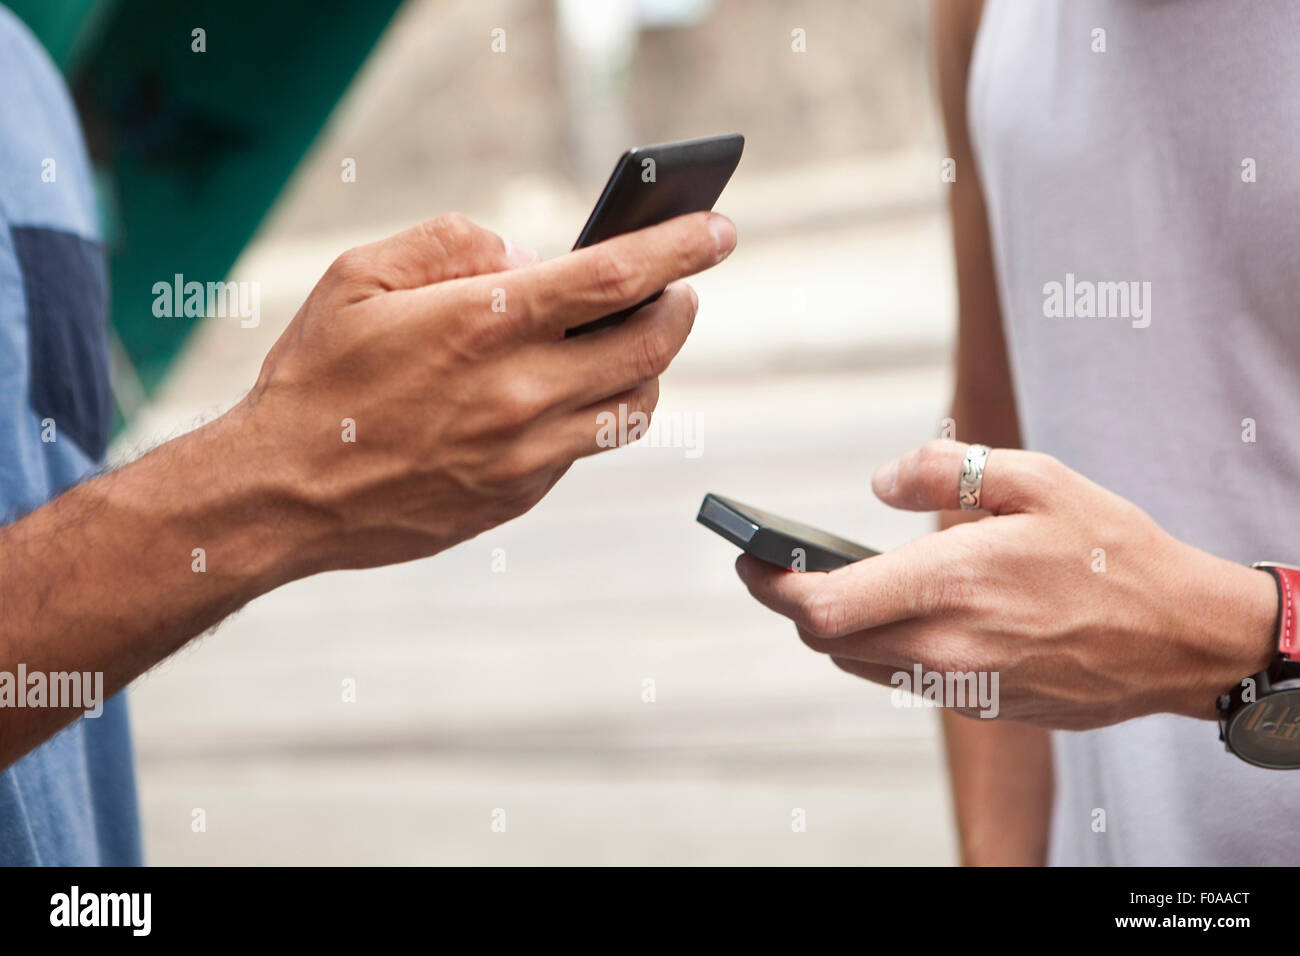 Two men holding smartphones, focus on hands, close-up Stock Photo